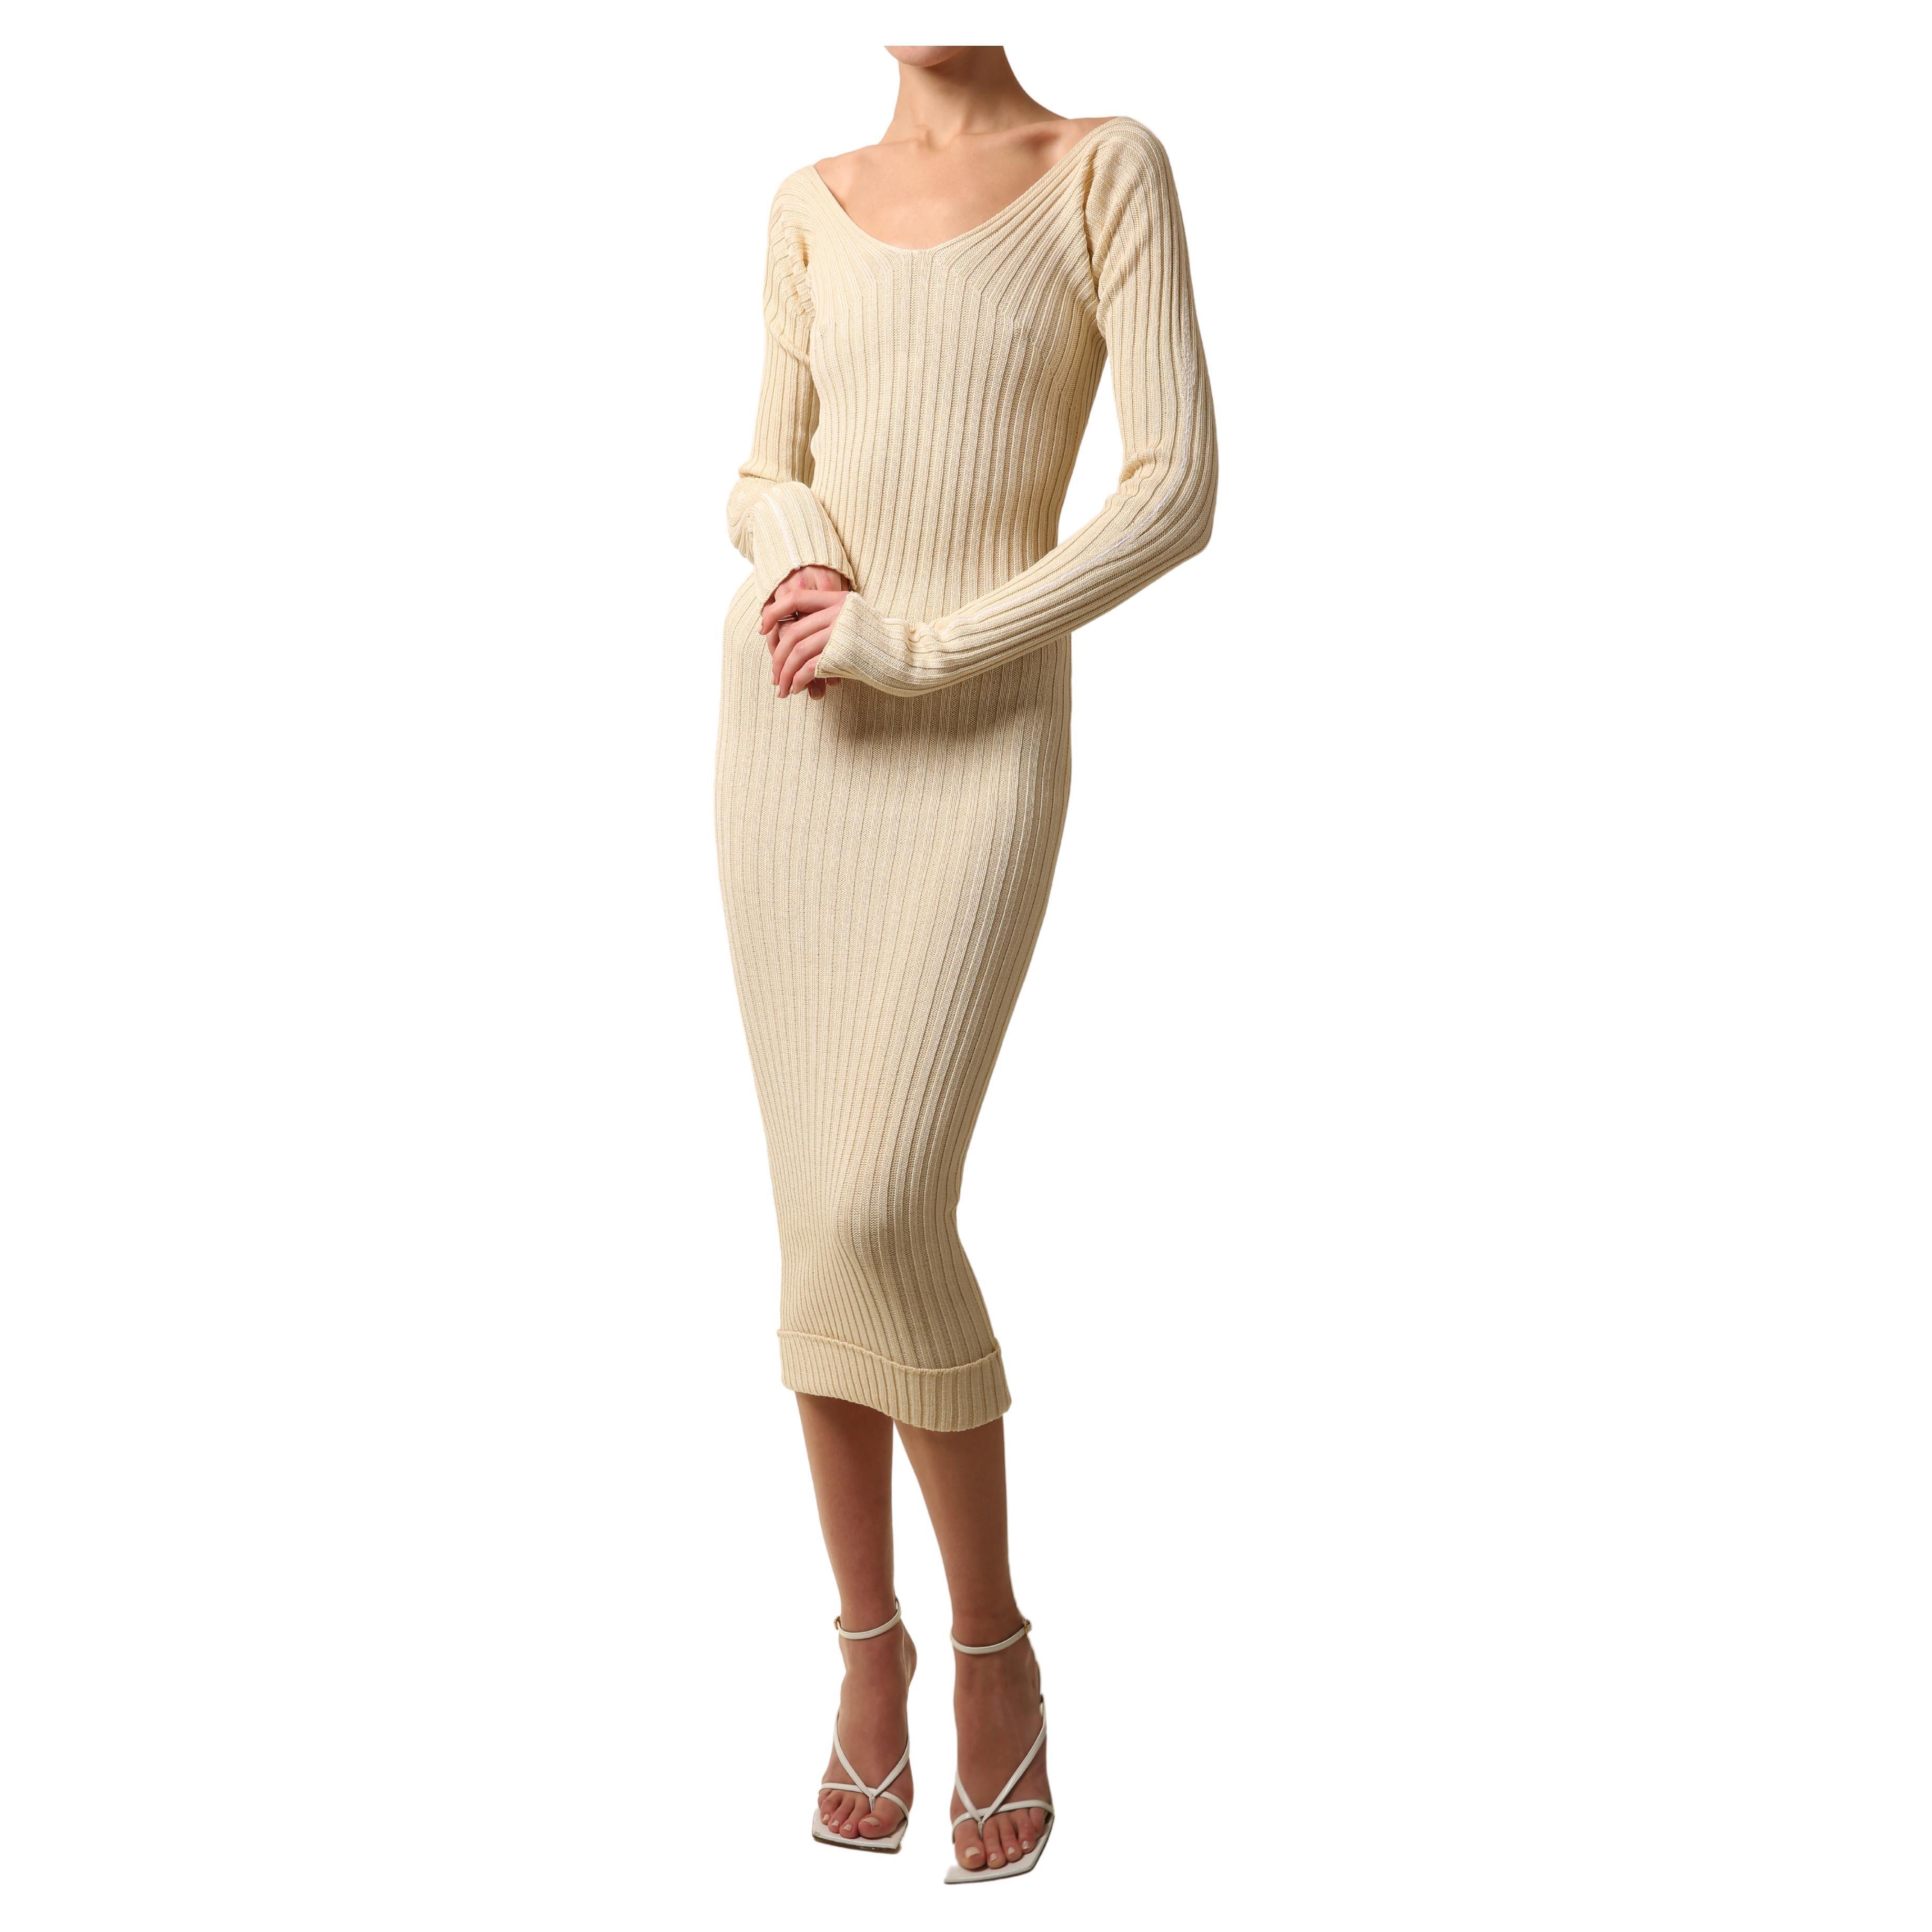 Celine Phoebe Philo cream ribbed stretch body con knitted sweater midi dress